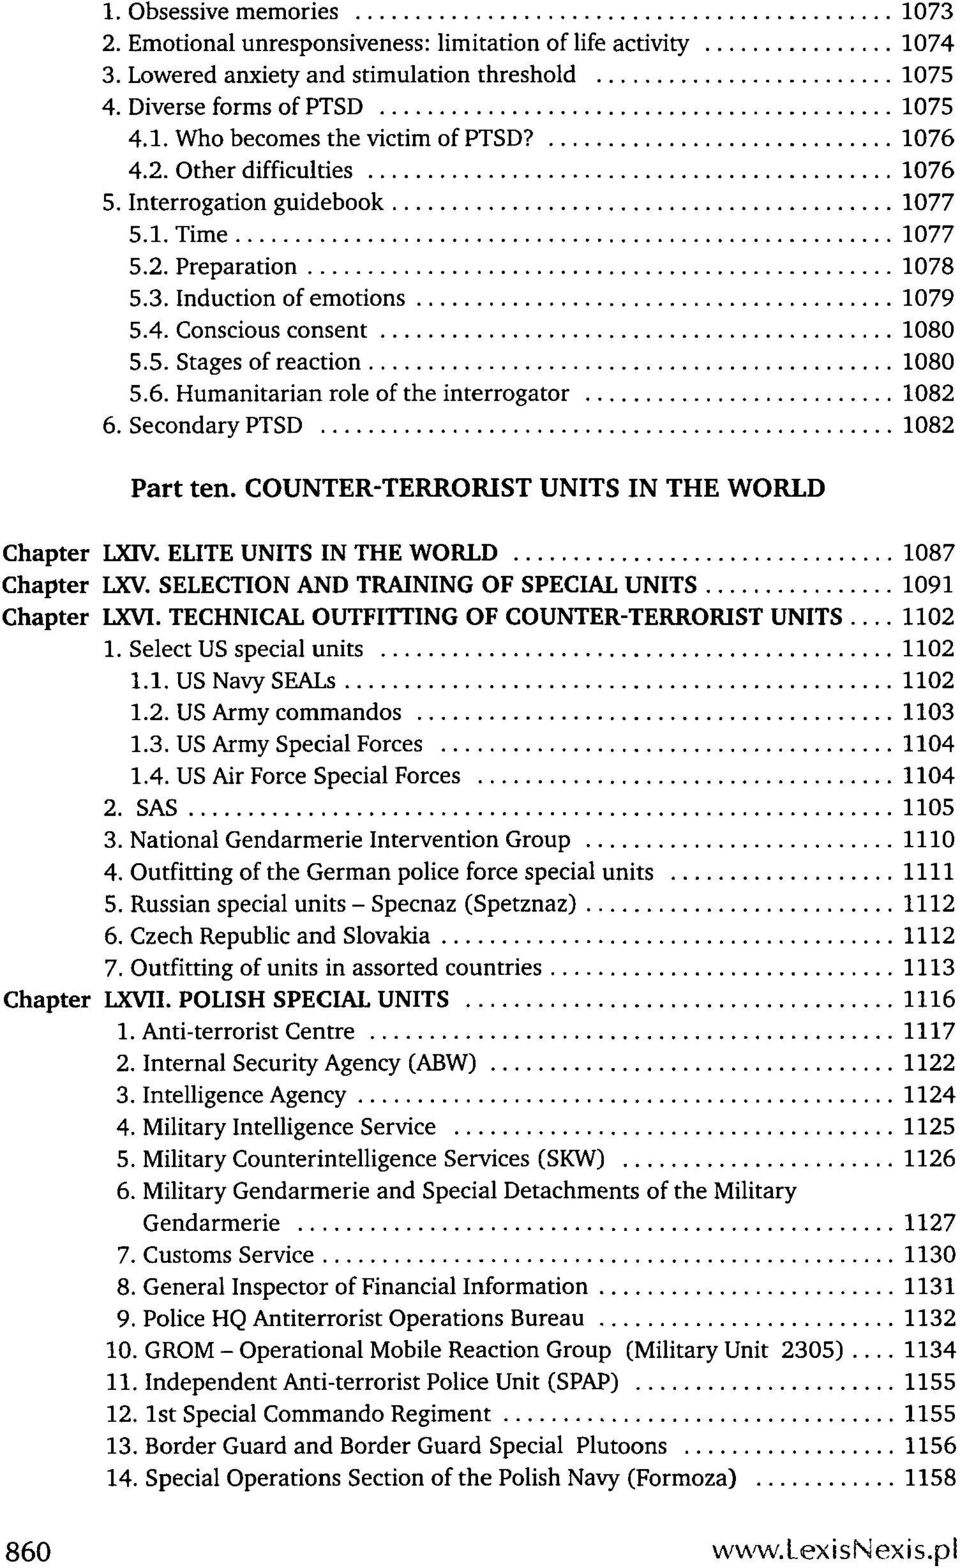 Secondary PTSD 1082 Part ten. COUNTER-TERRORIST UNITS IN THE WORLD Chapter LXIV. ELITĘ UNITS IN THE WORLD 1087 Chapter LXV. SELECTION AND TRAINING OF SPECIAL UNITS 1091 Chapter LXVI.